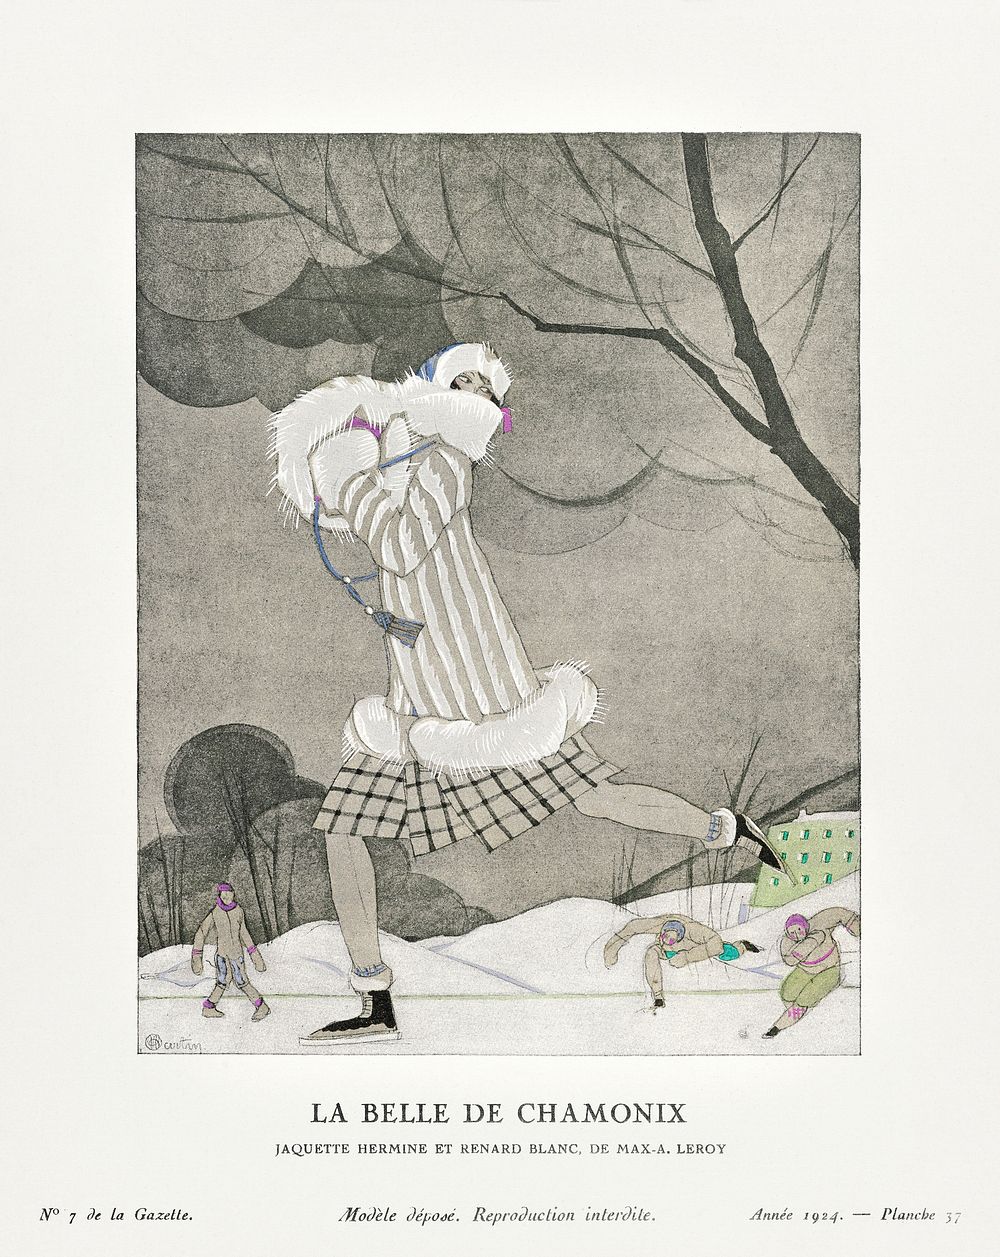 La Belle de Chamonix, ermine and white fox jacket, by Max-A. Leroy (1924) fashion plate in high resolution by Charles…